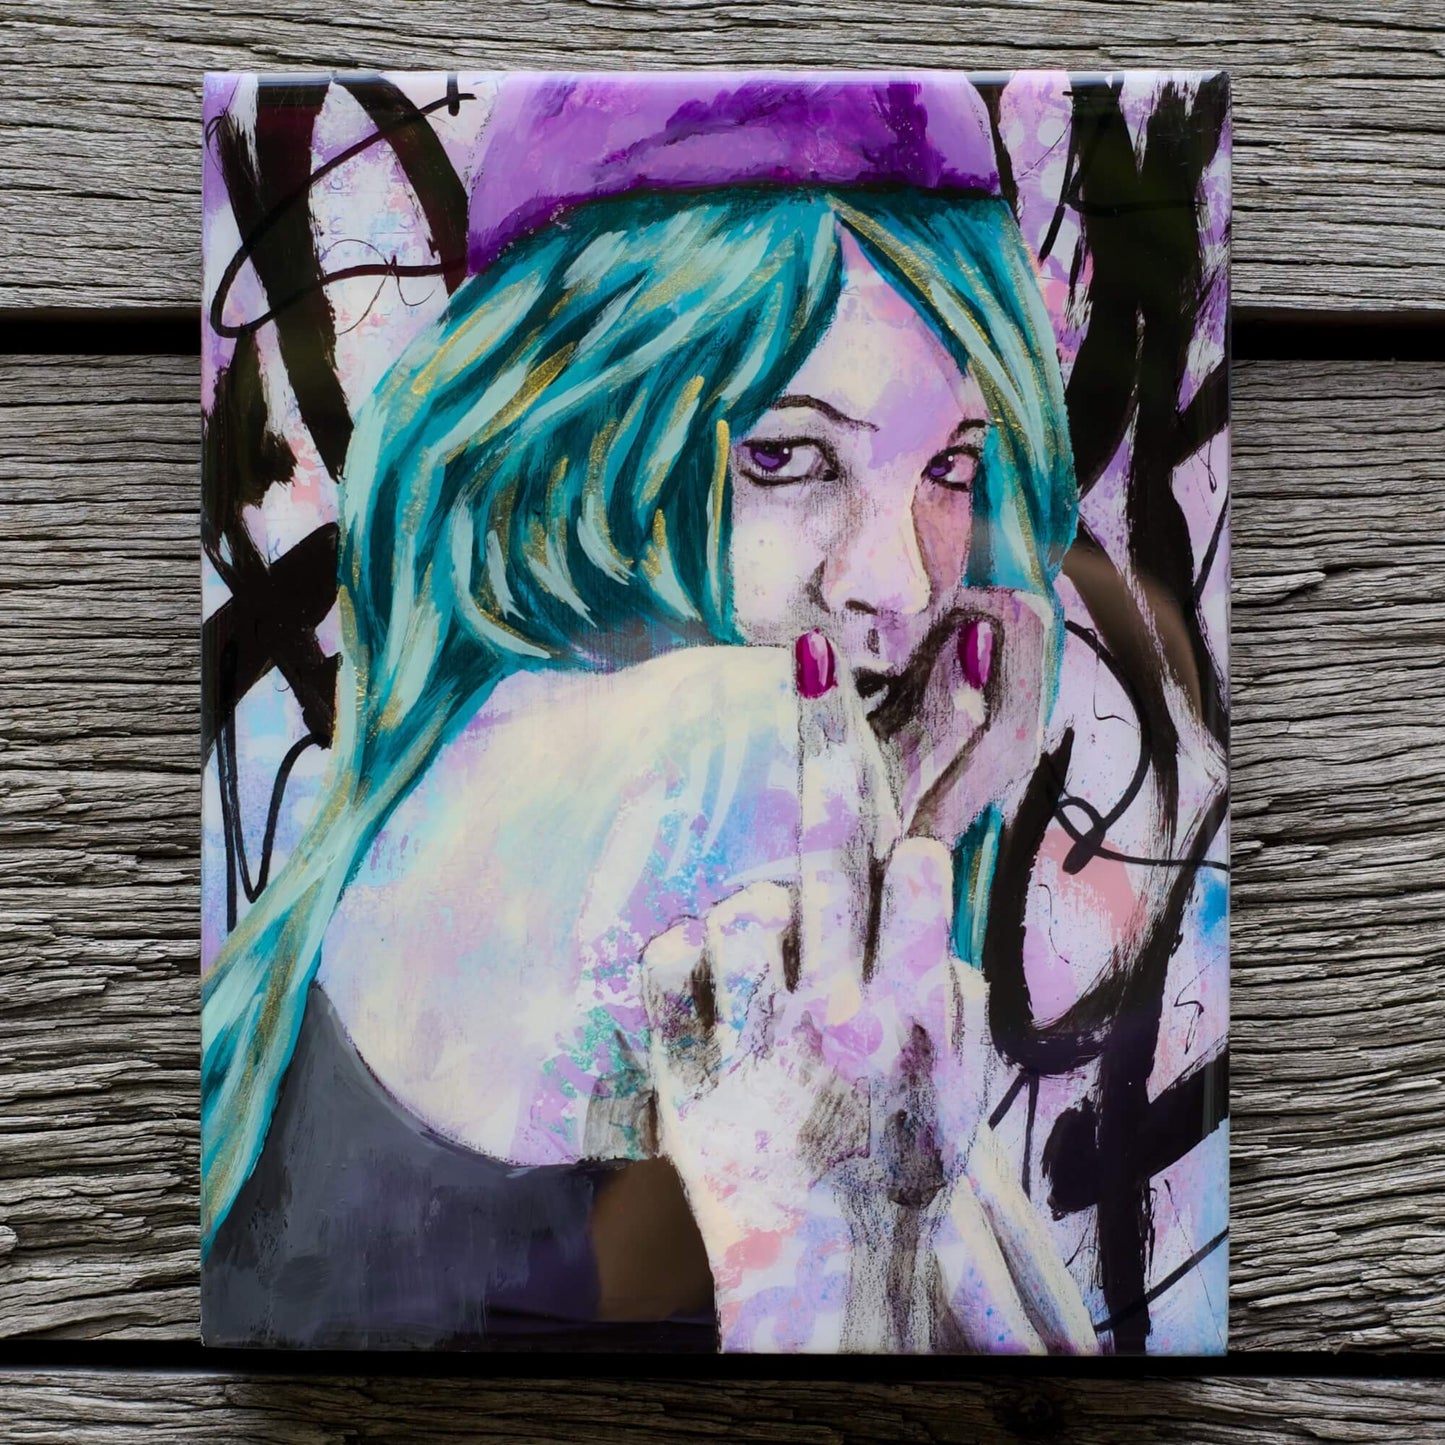 Abstract Art Paintings of Women | Mixed Media Street Art For Sale in Melbourne